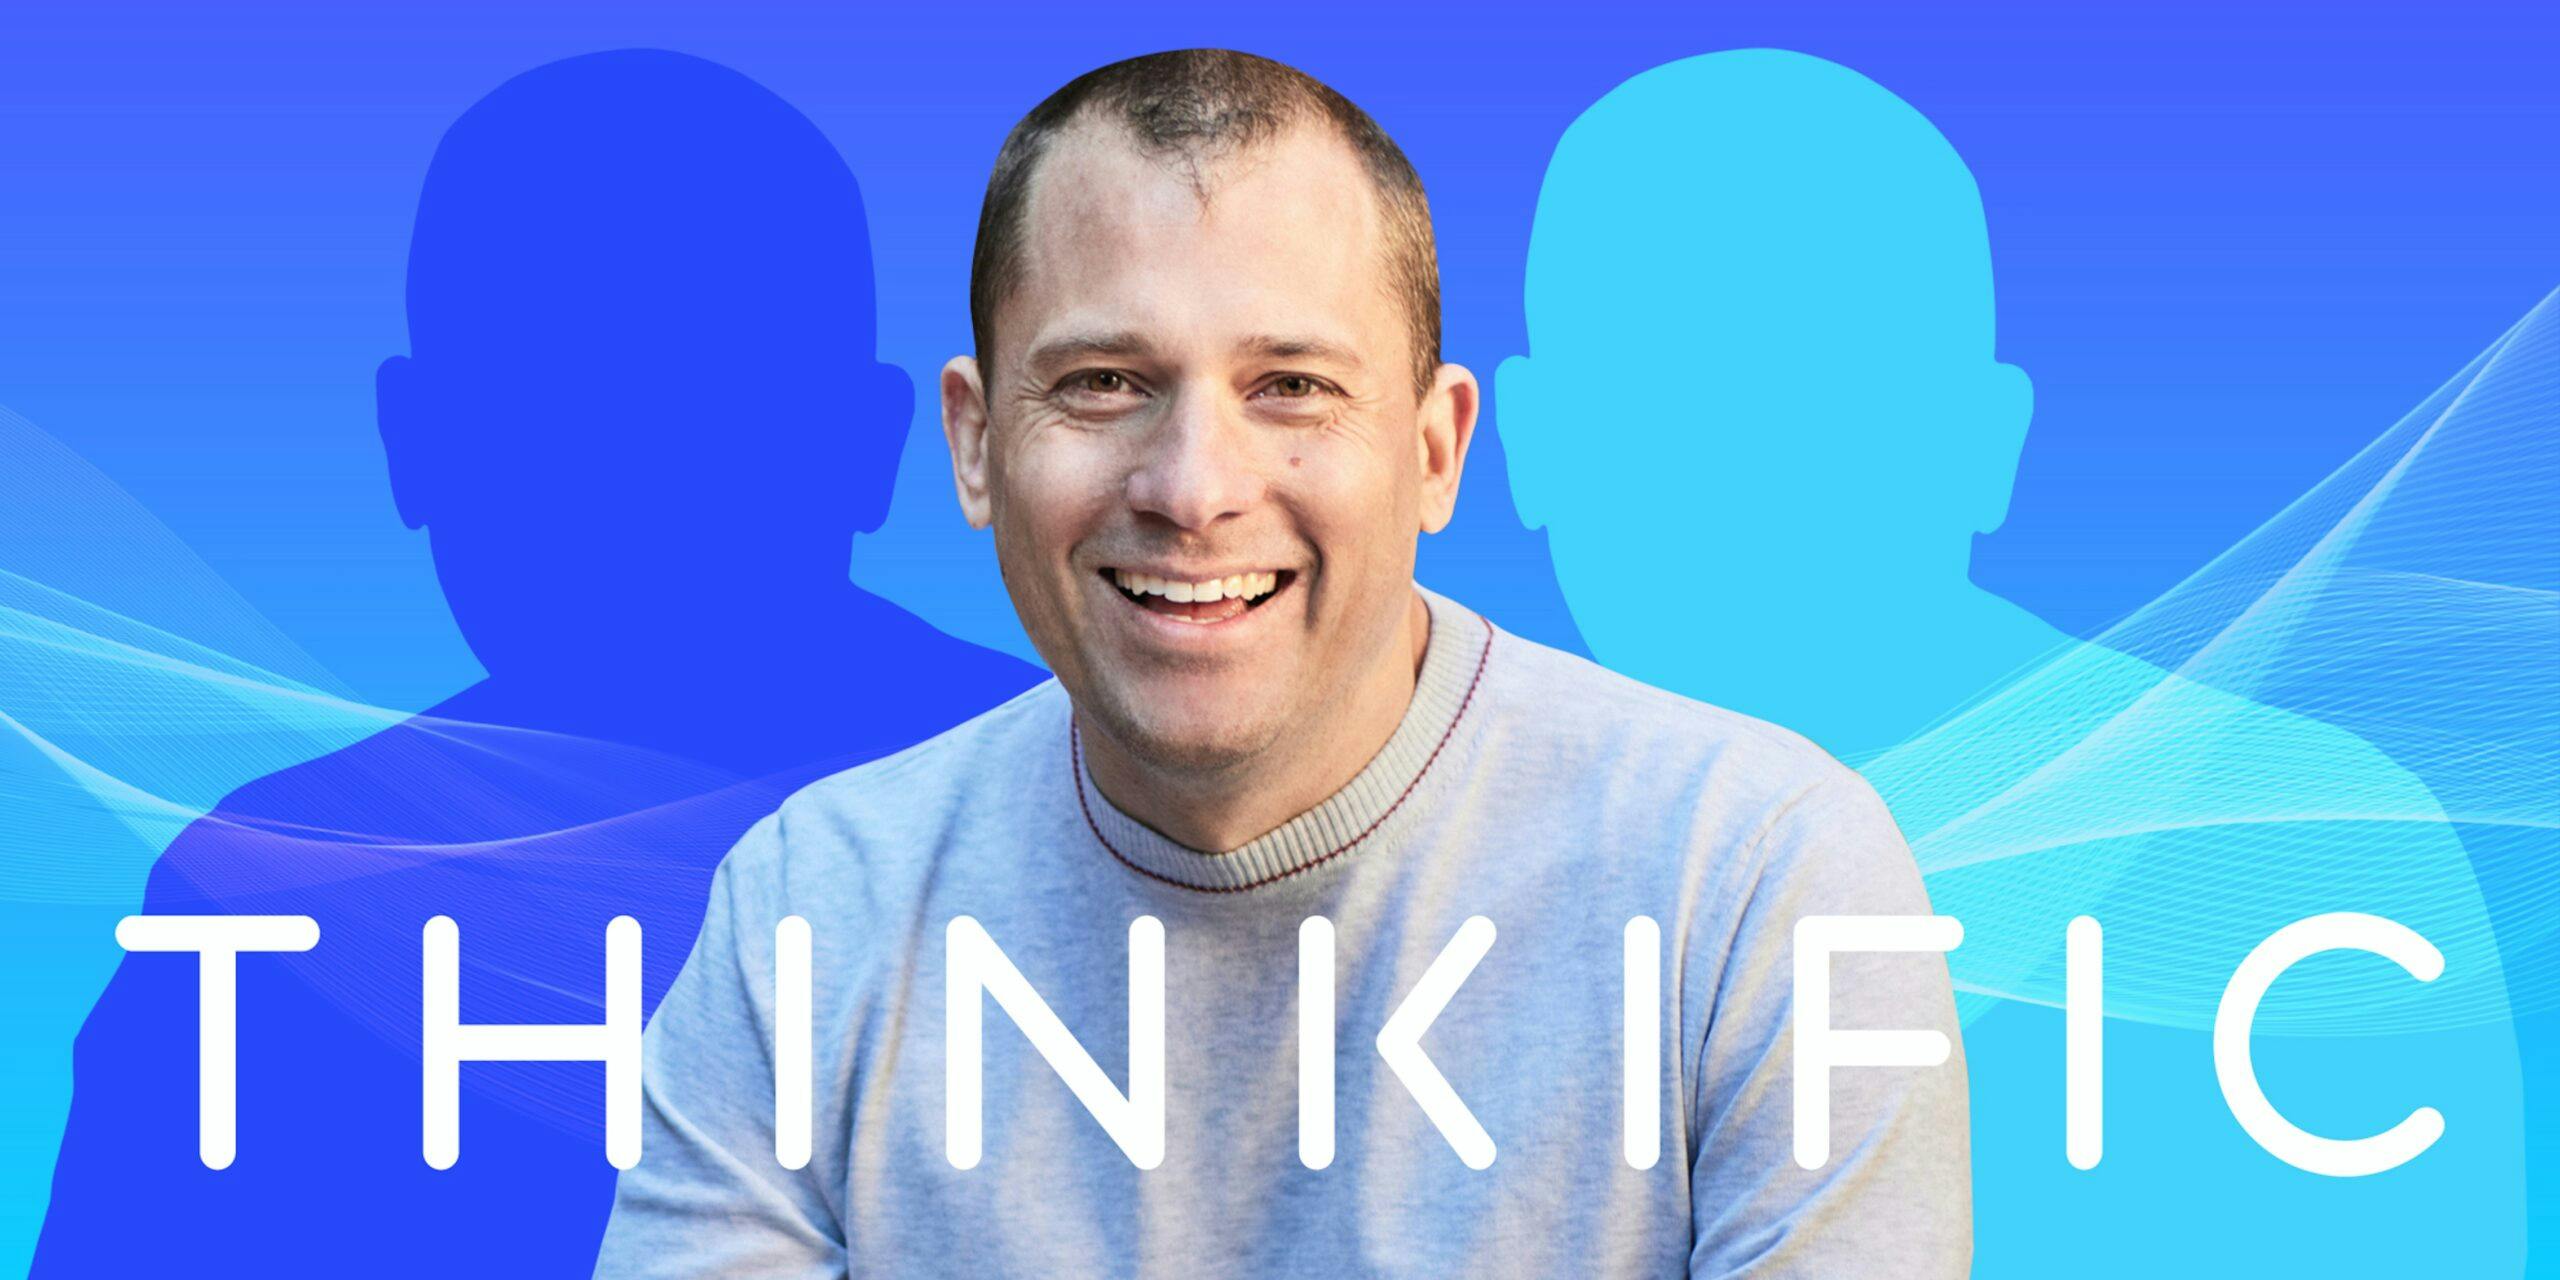 Thinkific CEO Greg Smith shares findings on the rise of the creator-educator